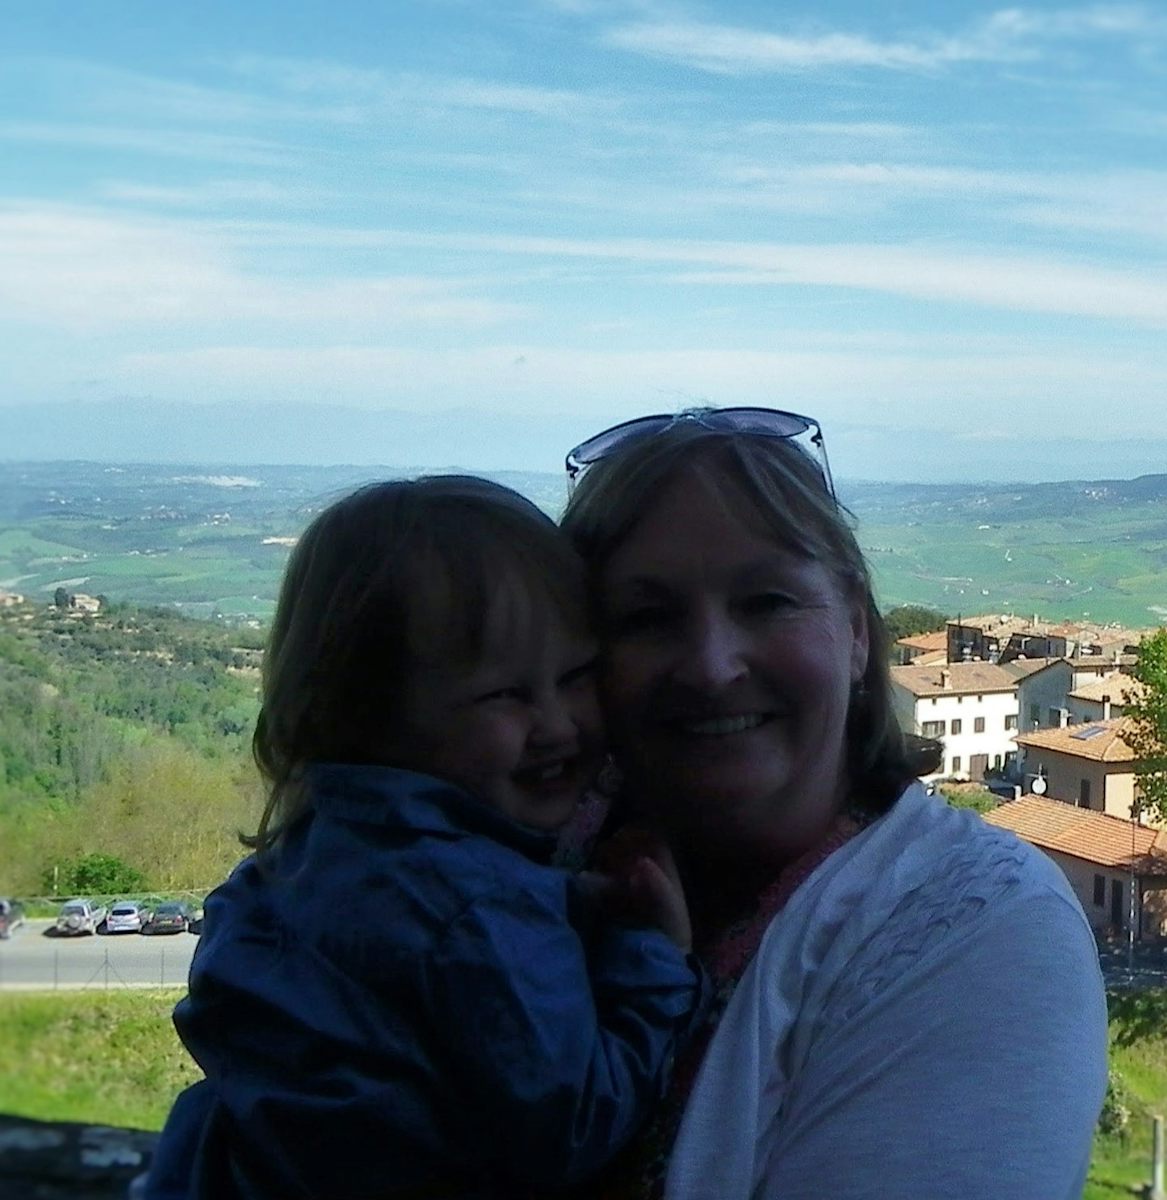 Me and my granddaughter, Sophie, taking in the Tuscan views!  Sharing this trip with Sophie made it is so much more fun as you get the chance to see the sites and taste the fabulous food through the eyes and mouth of a 3 year old.